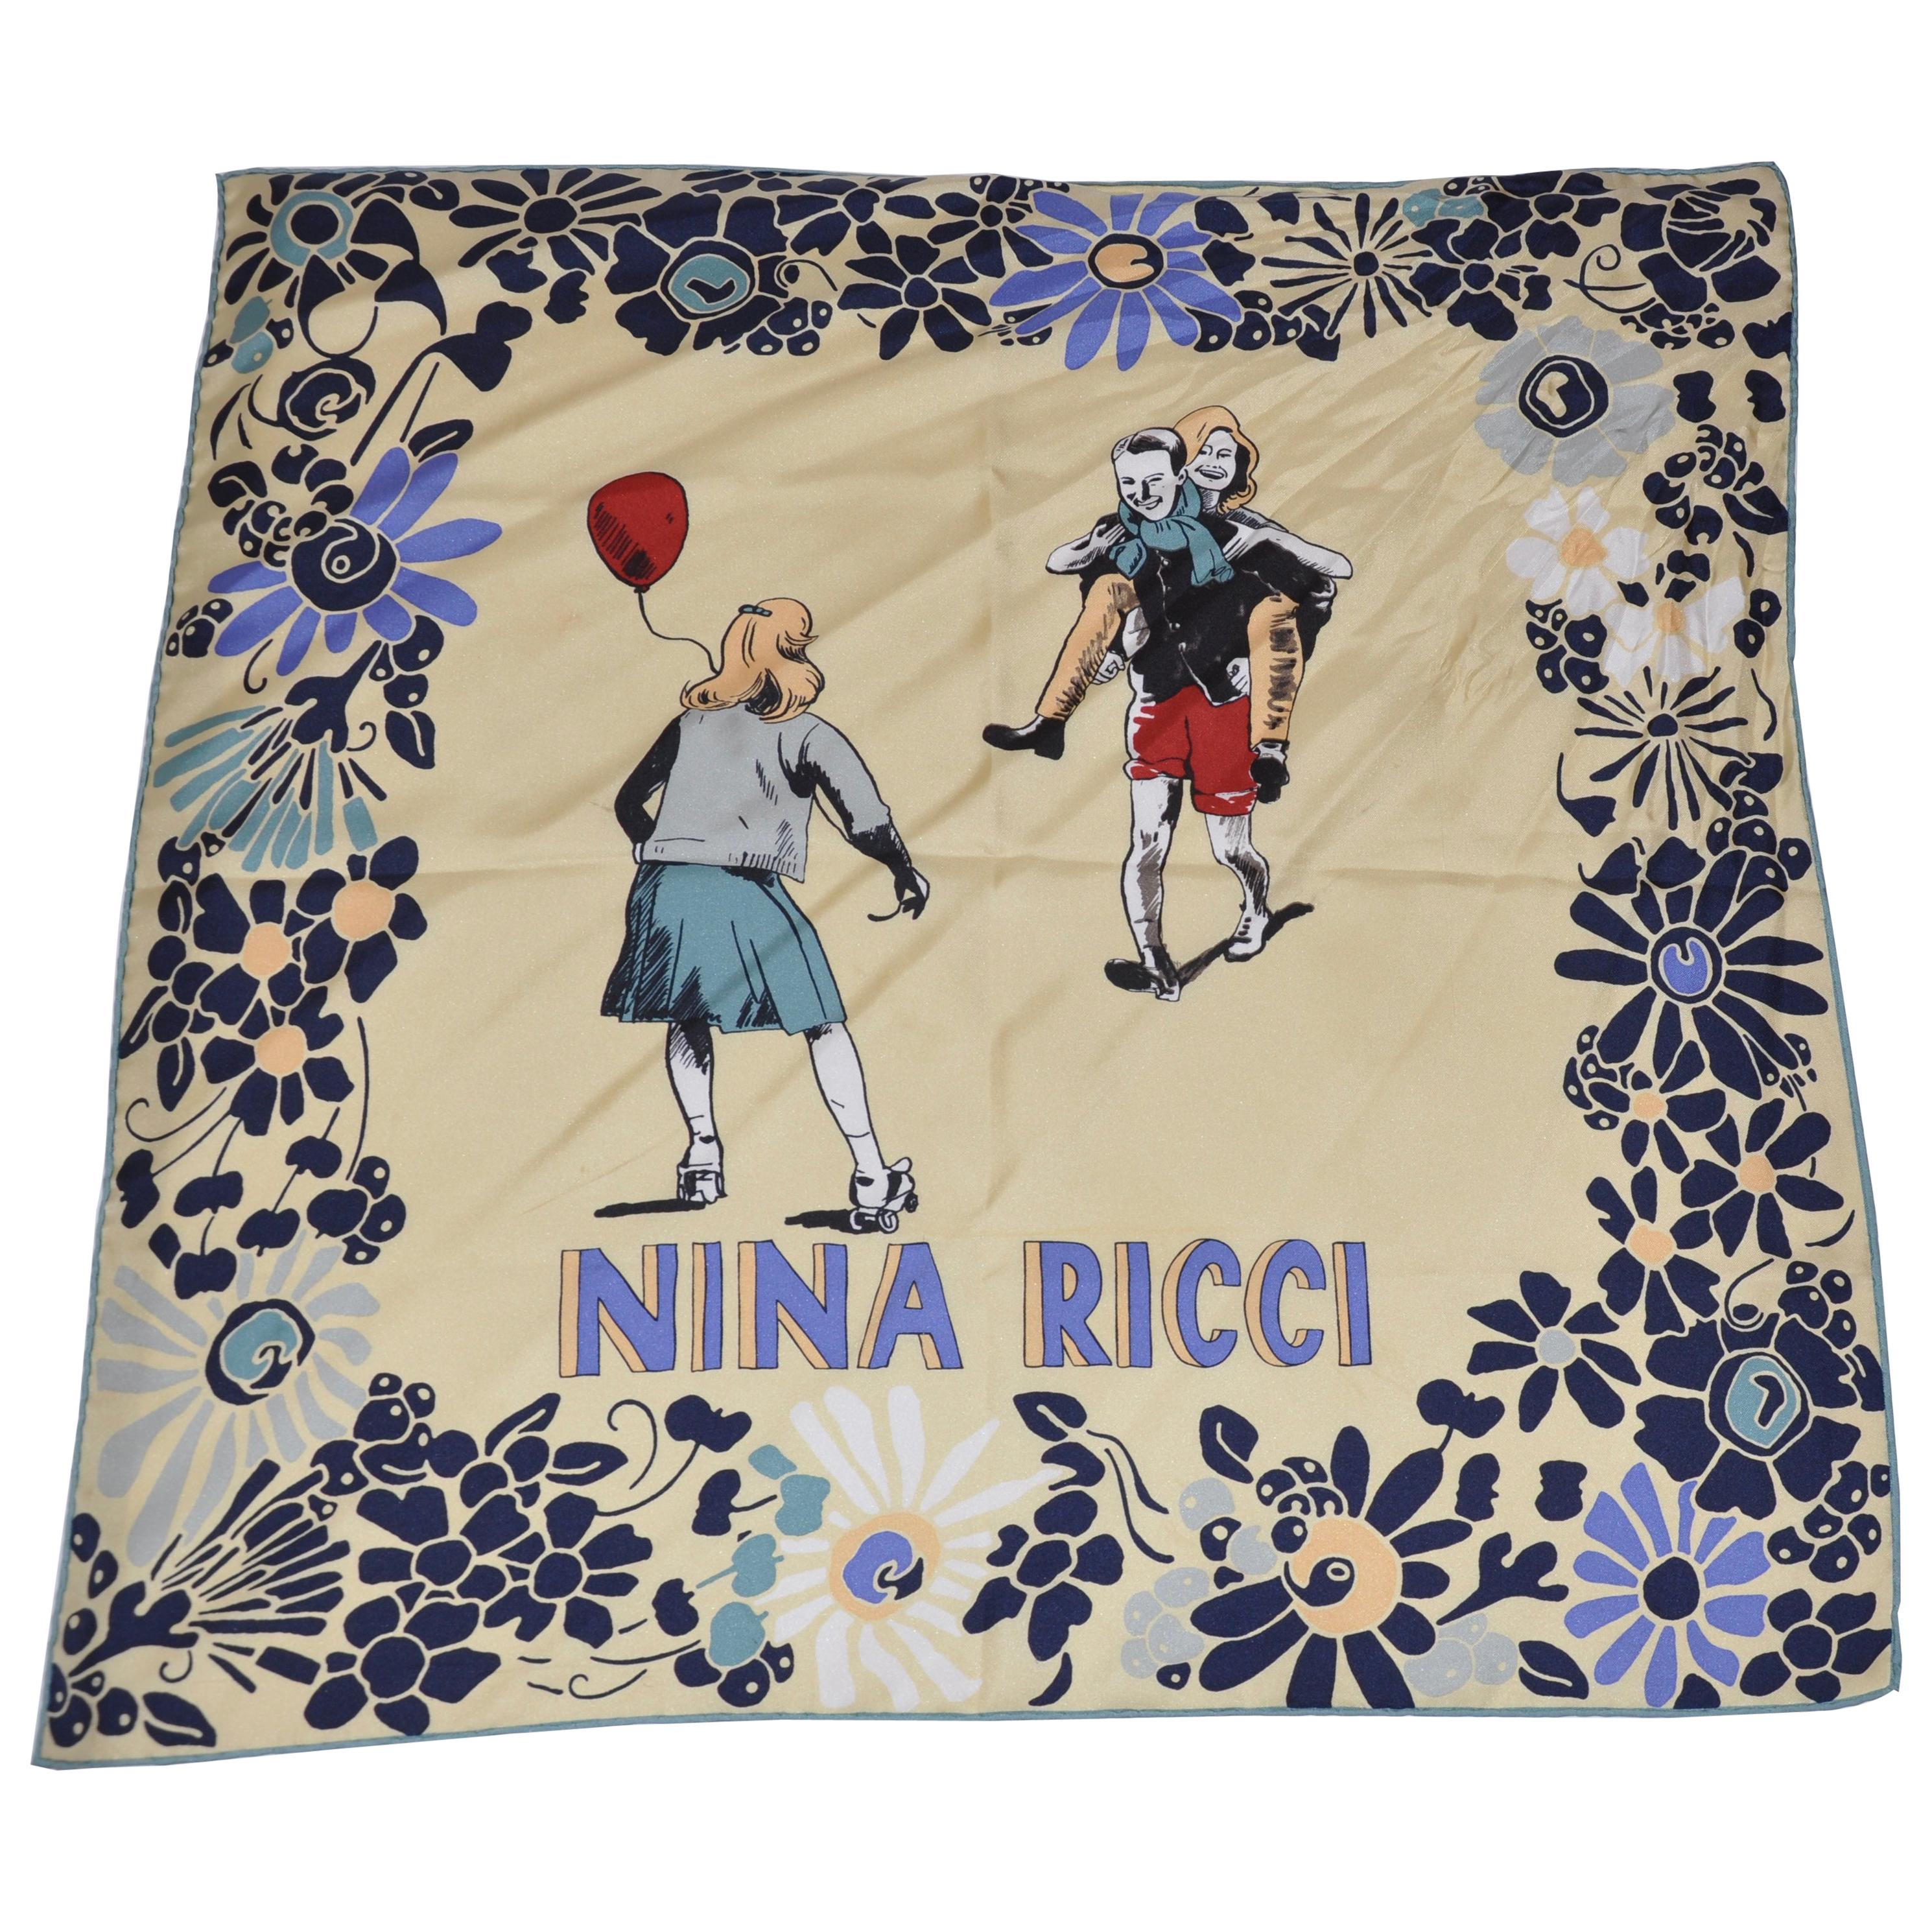 Authentic 1980s Made in Italy Nina Ricci luxury designer silk scarf vintage square floral bird